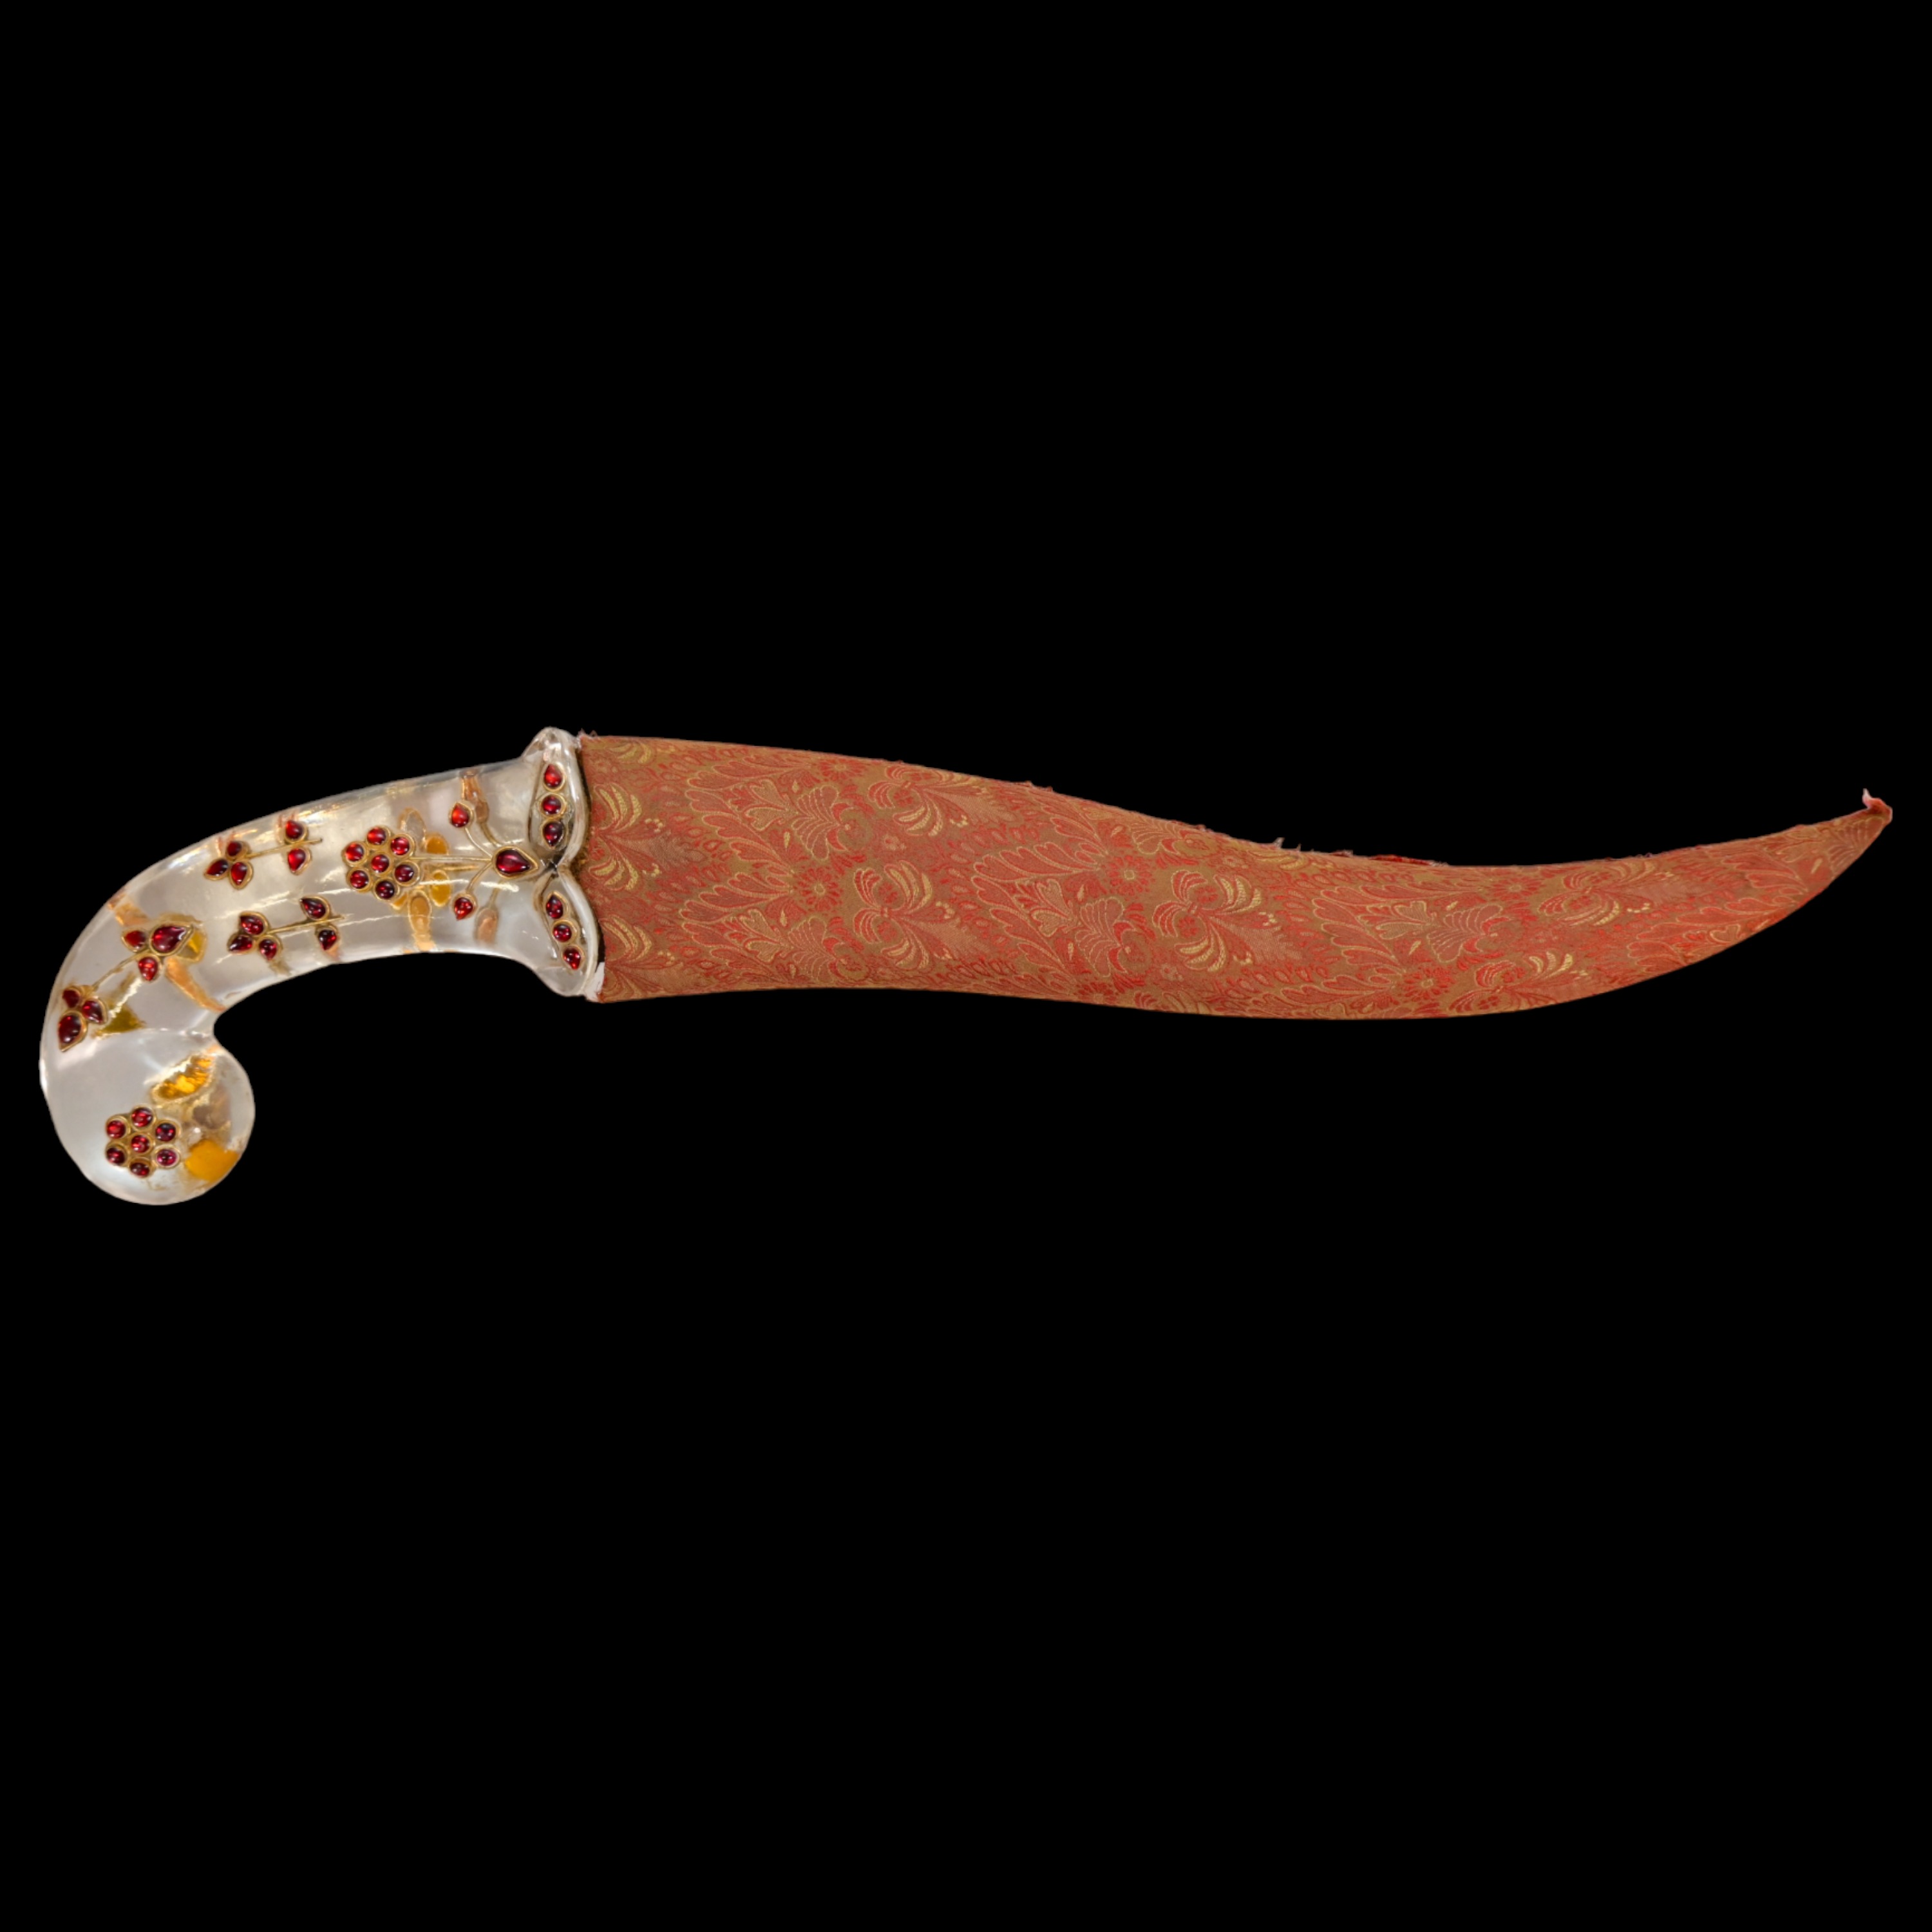 A Rare Mughal gem-set rock crystal hilted dagger with scabbard, India, 18th century. - Image 3 of 13